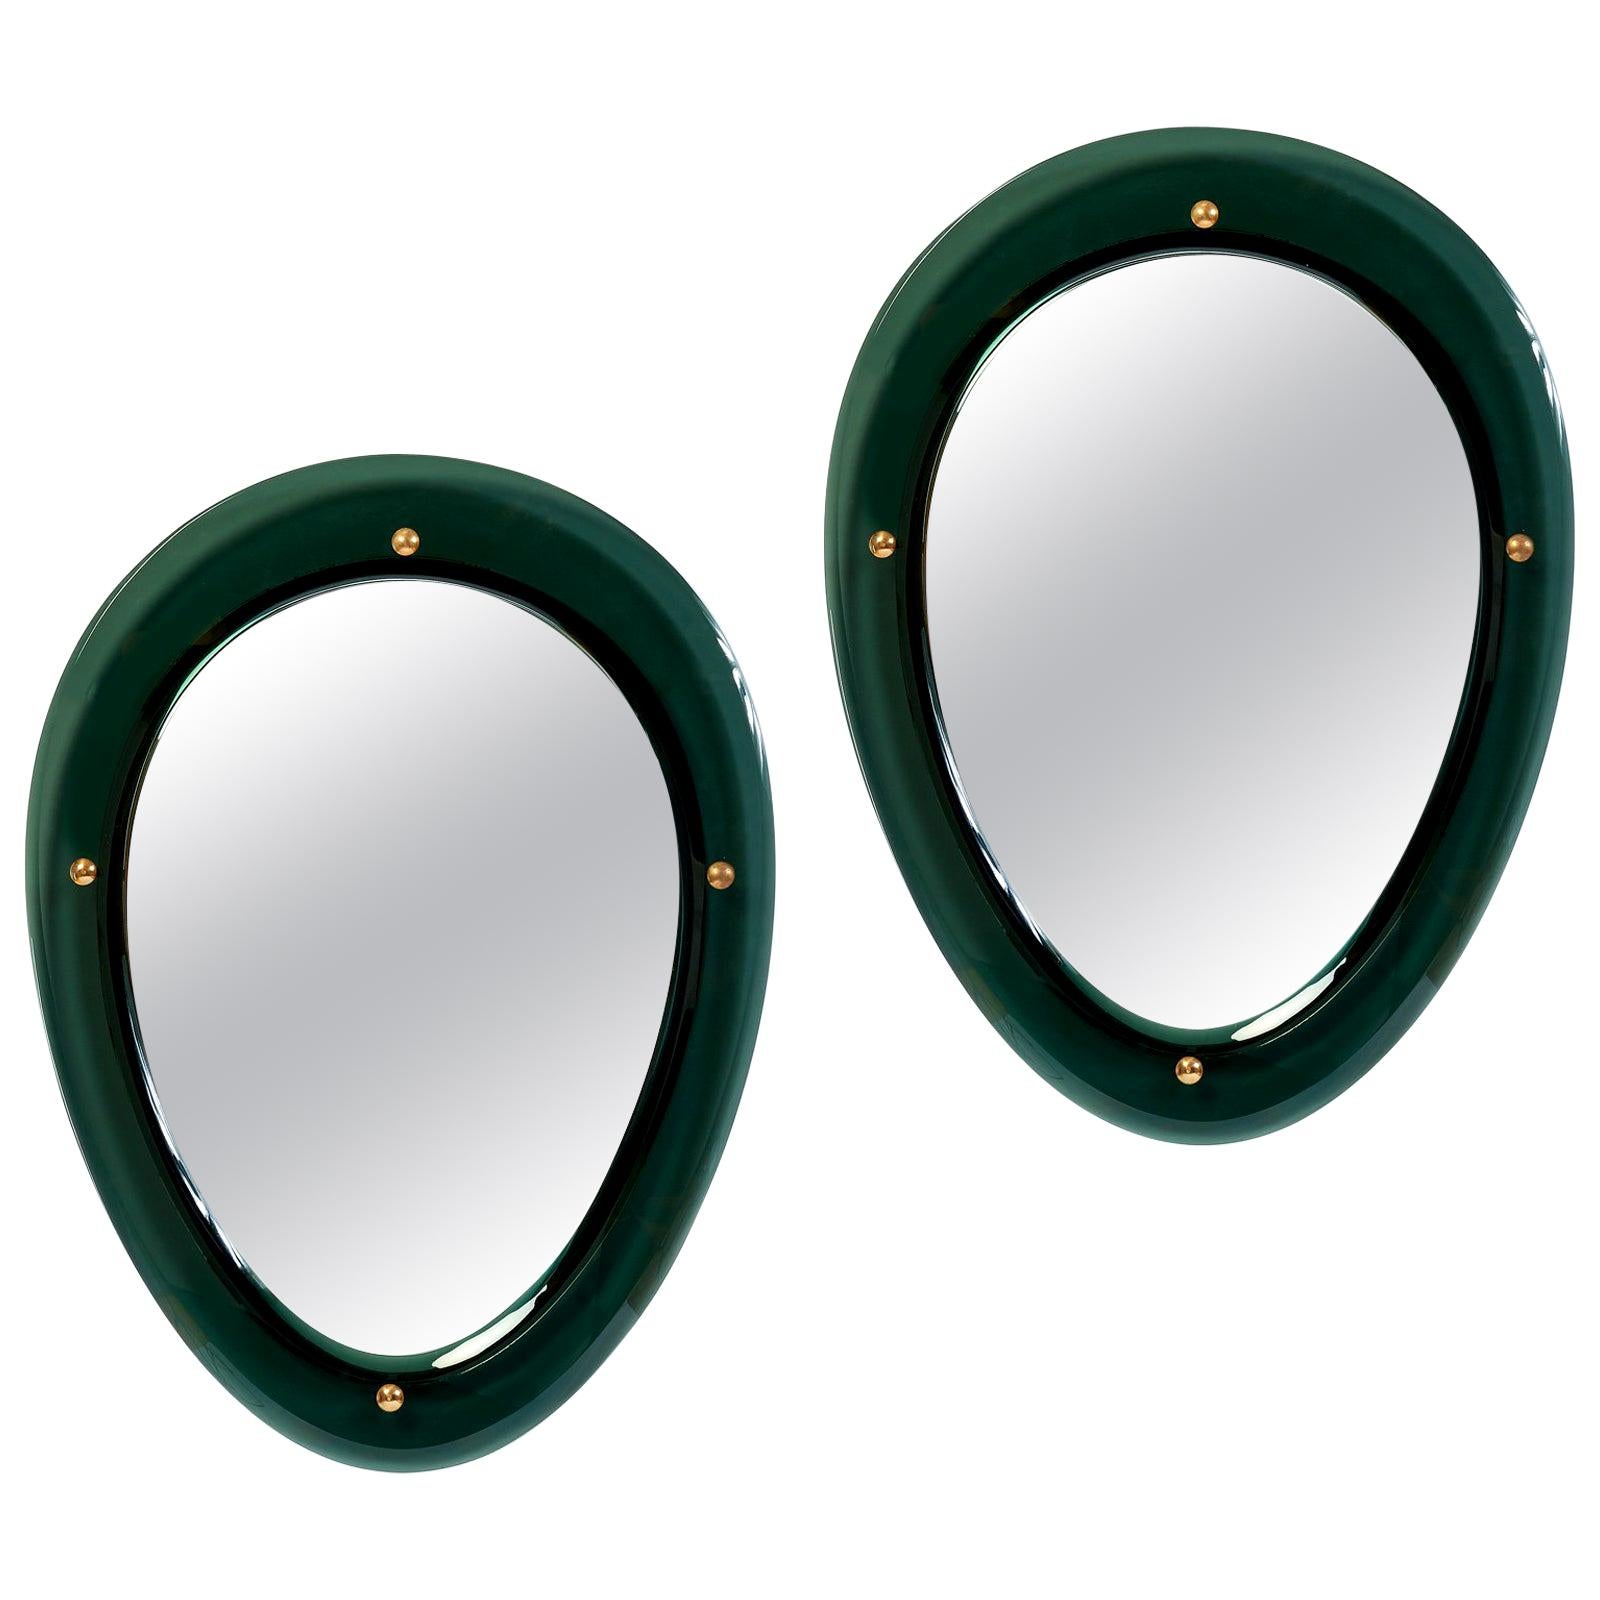 Pair of Oval Shaped Colored Glass Mirrors, Italy, 1950s